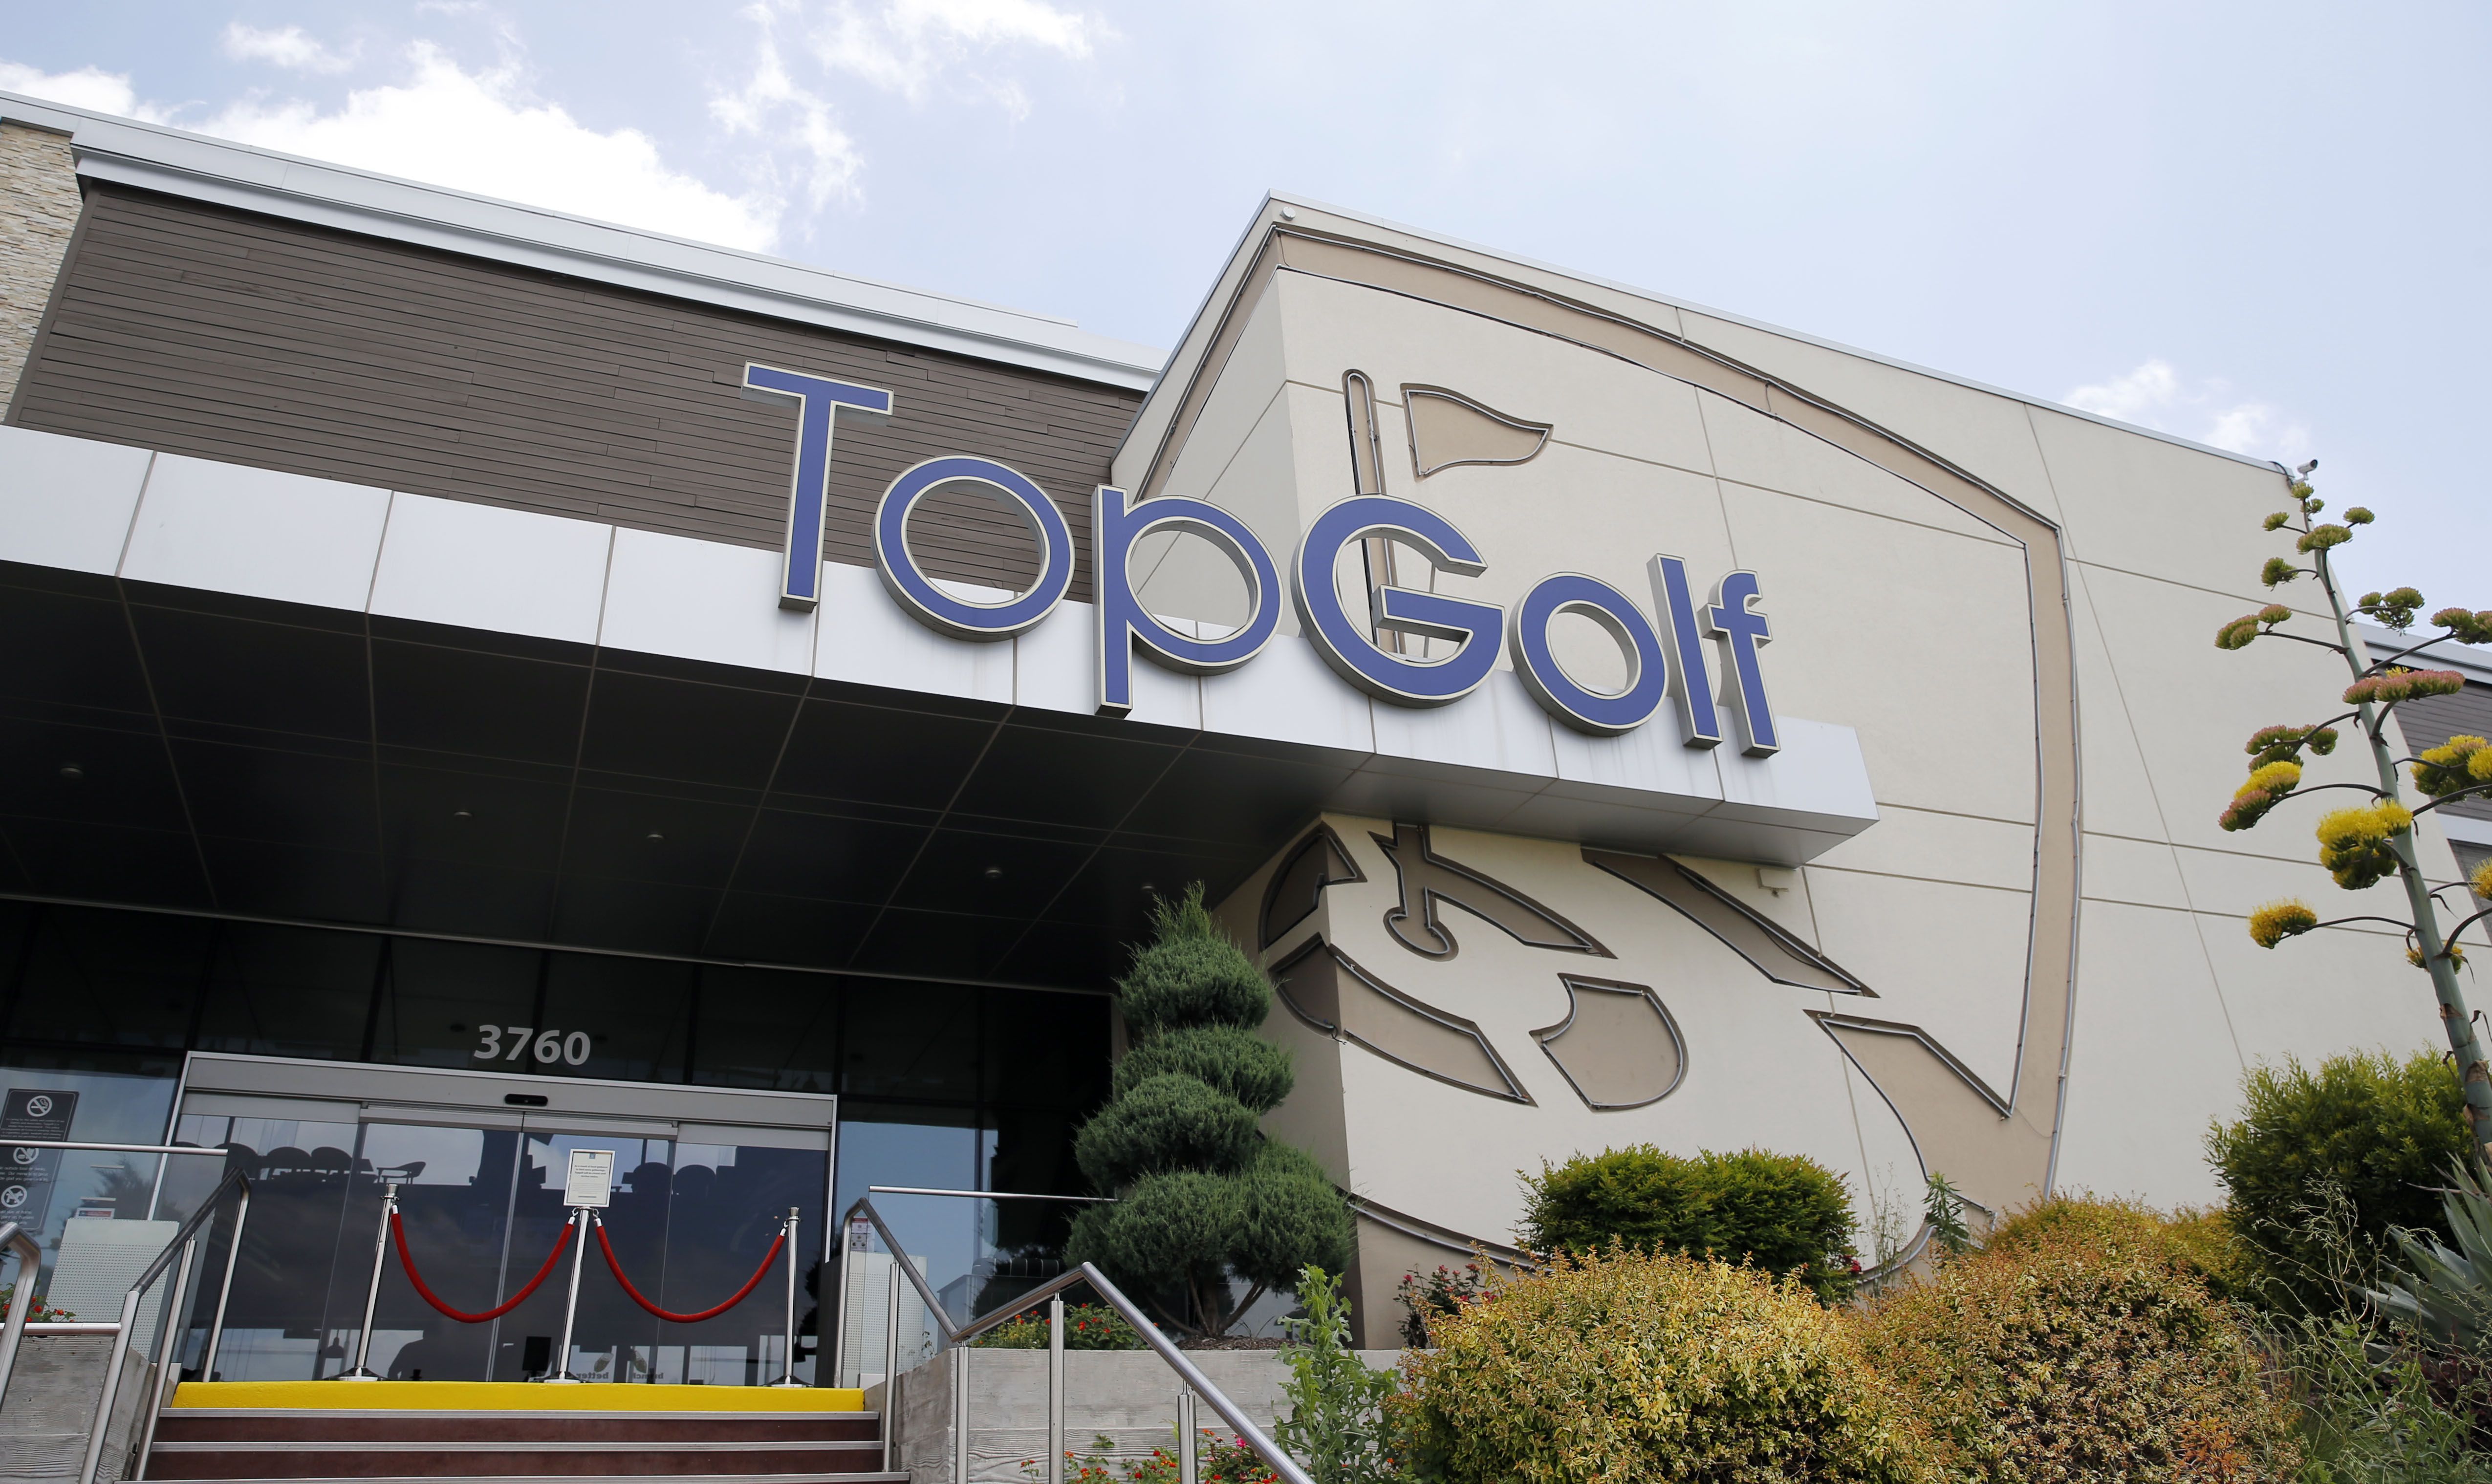 Topgolf Orlando is Coming Early 2017